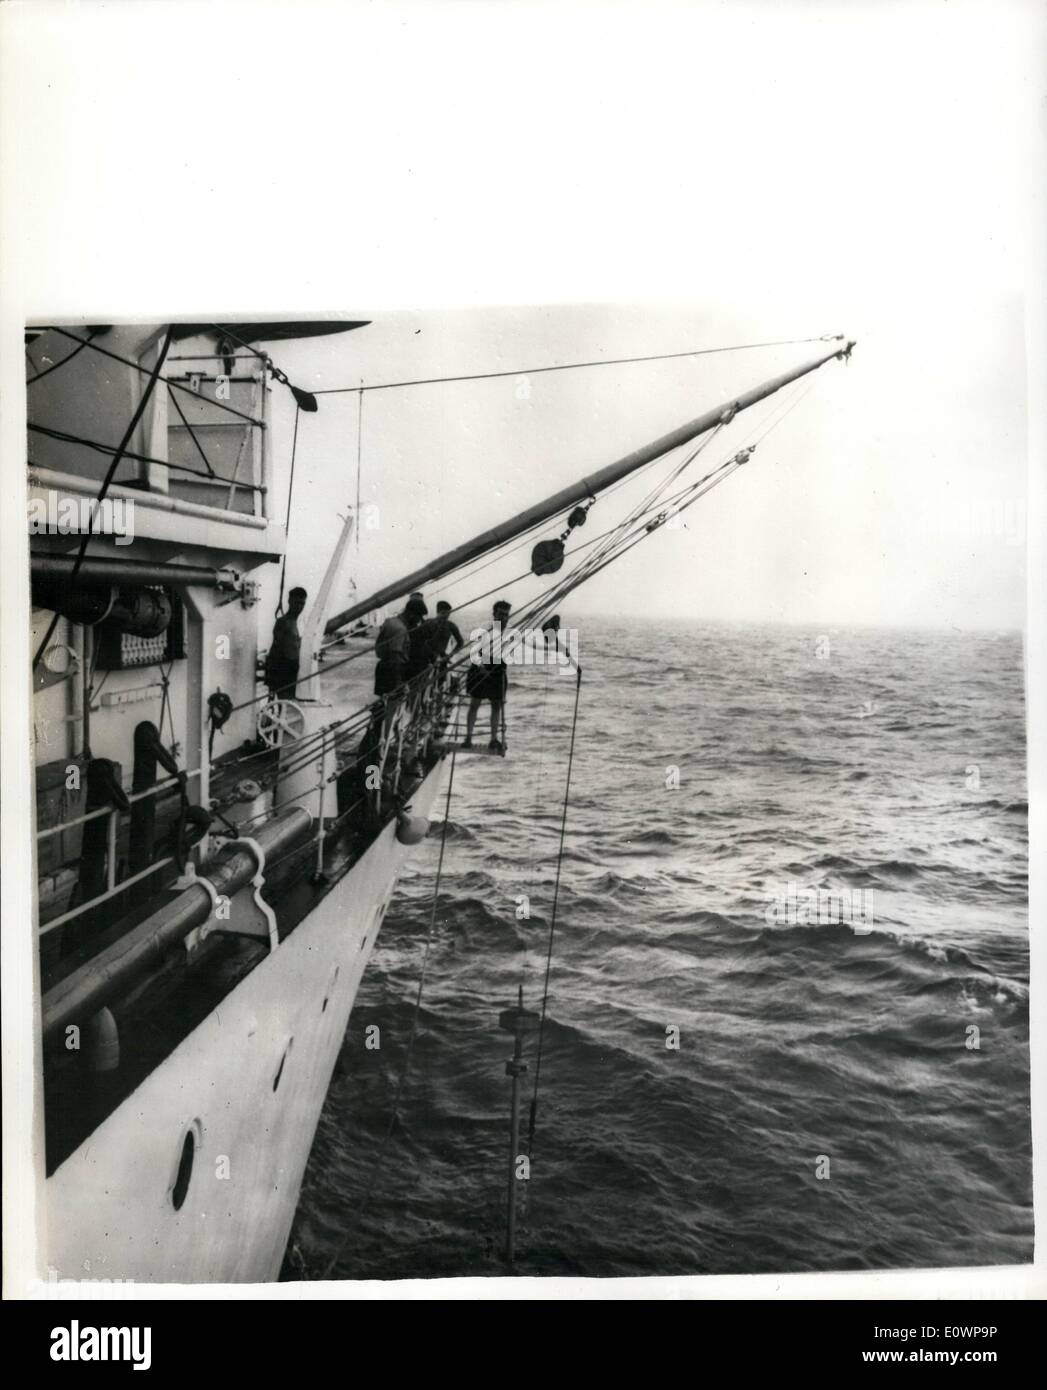 Jan. 01, 1964 - Boring into the ocean bed- 15,000 feet below.: The British surey ship H.M.S Vidal is returning to this country after having made a four month survey cruise in the South Atlantic. The Oceanographical survey has been carried out along four latitudes between West Africa and the West Indies, using a new precision depth recorded, stopping at selected ''stations'' taking water samples and temperature at various depths, while core samples,some nine feet in length, were taken from the ocean bed, at photographs using a special camera and flash equipment were taken of the ocean bed, Stock Photo